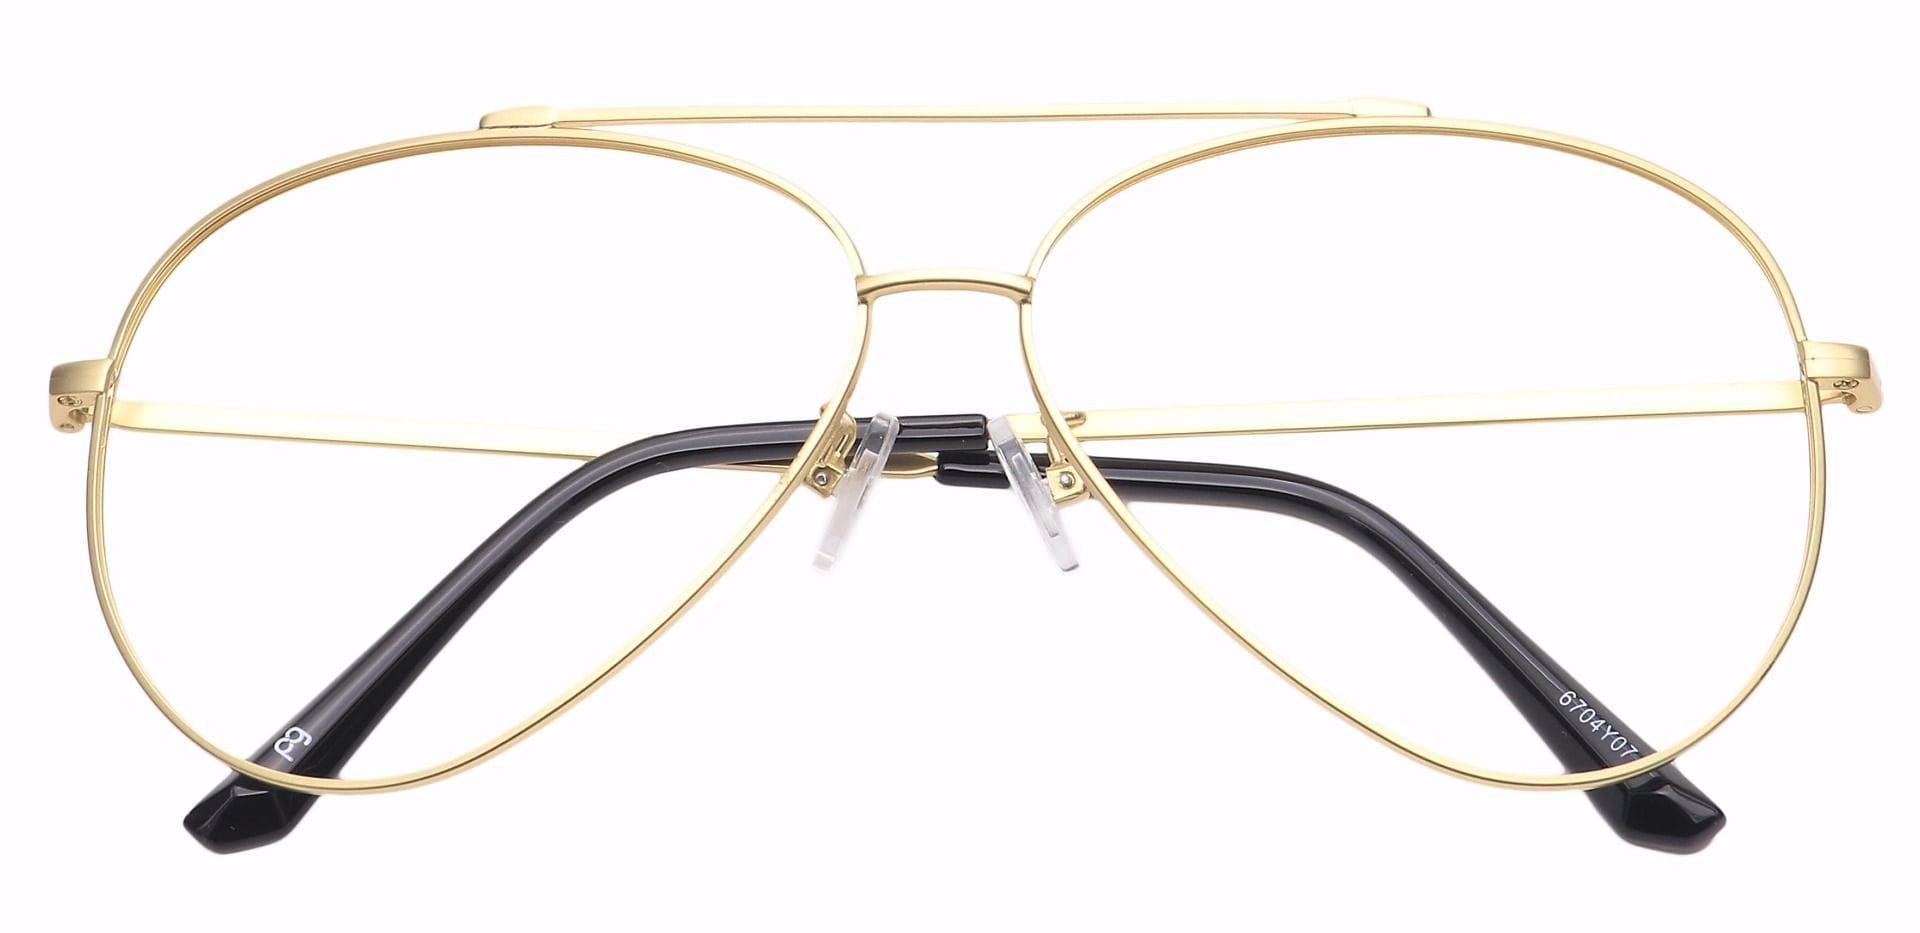 A pair of glasses with gold-tone aviator frames.